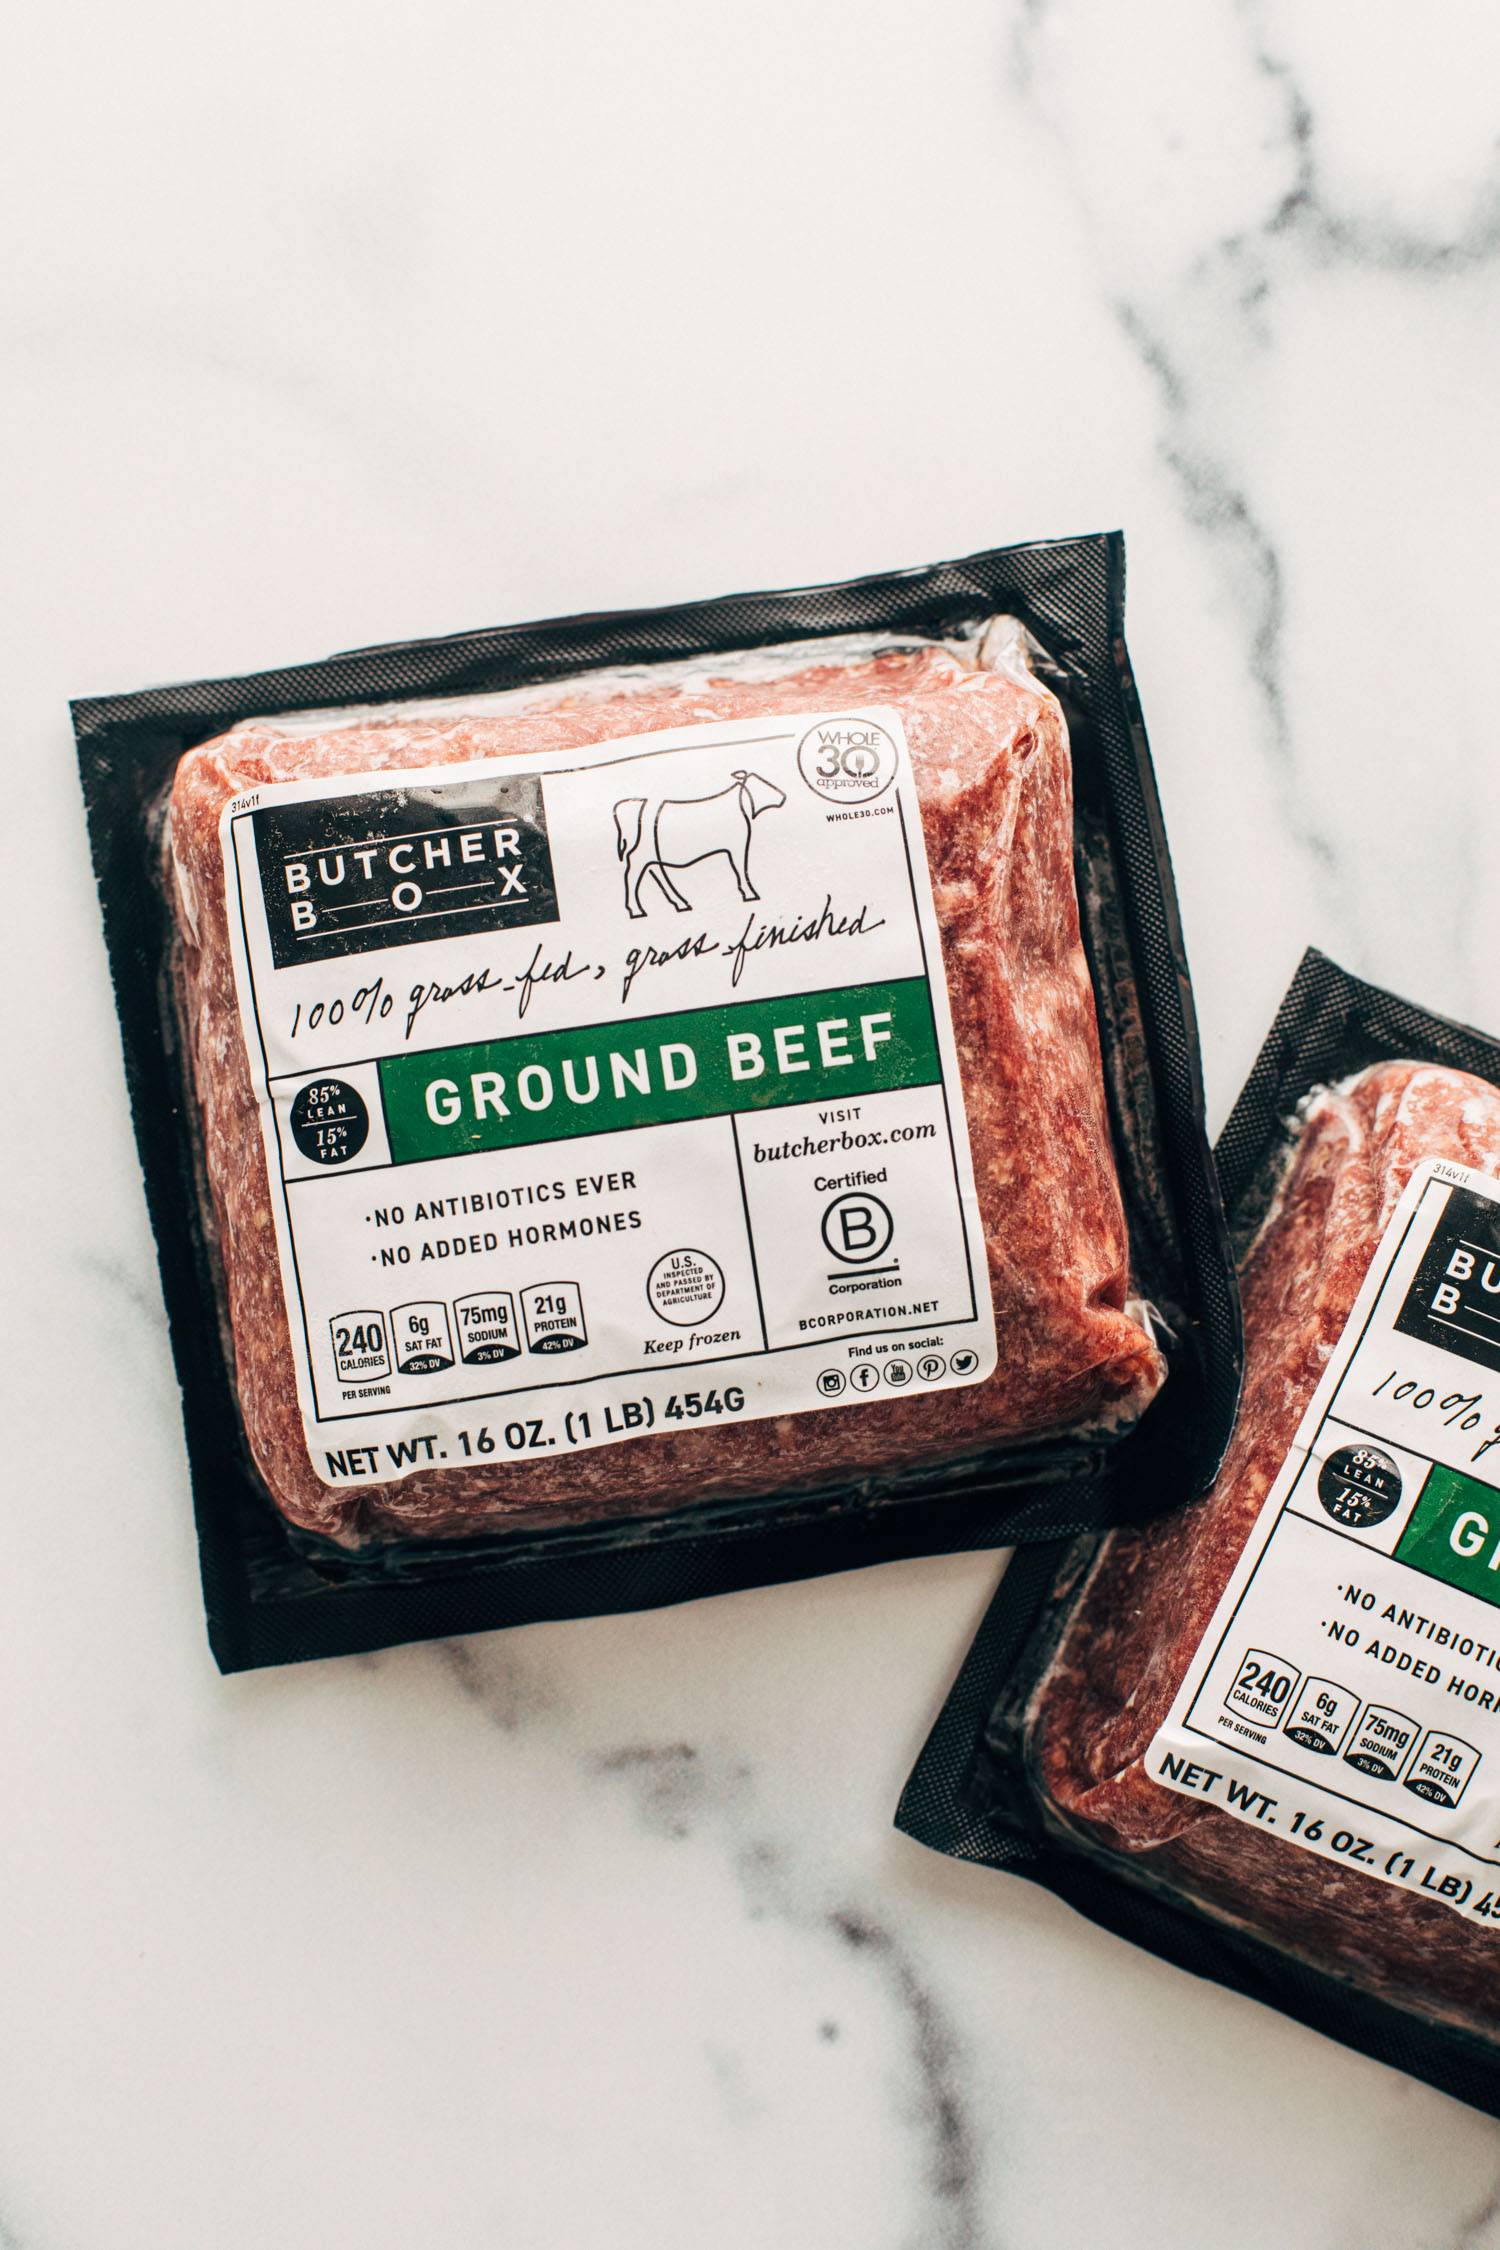 ButcherBox ground beef packages